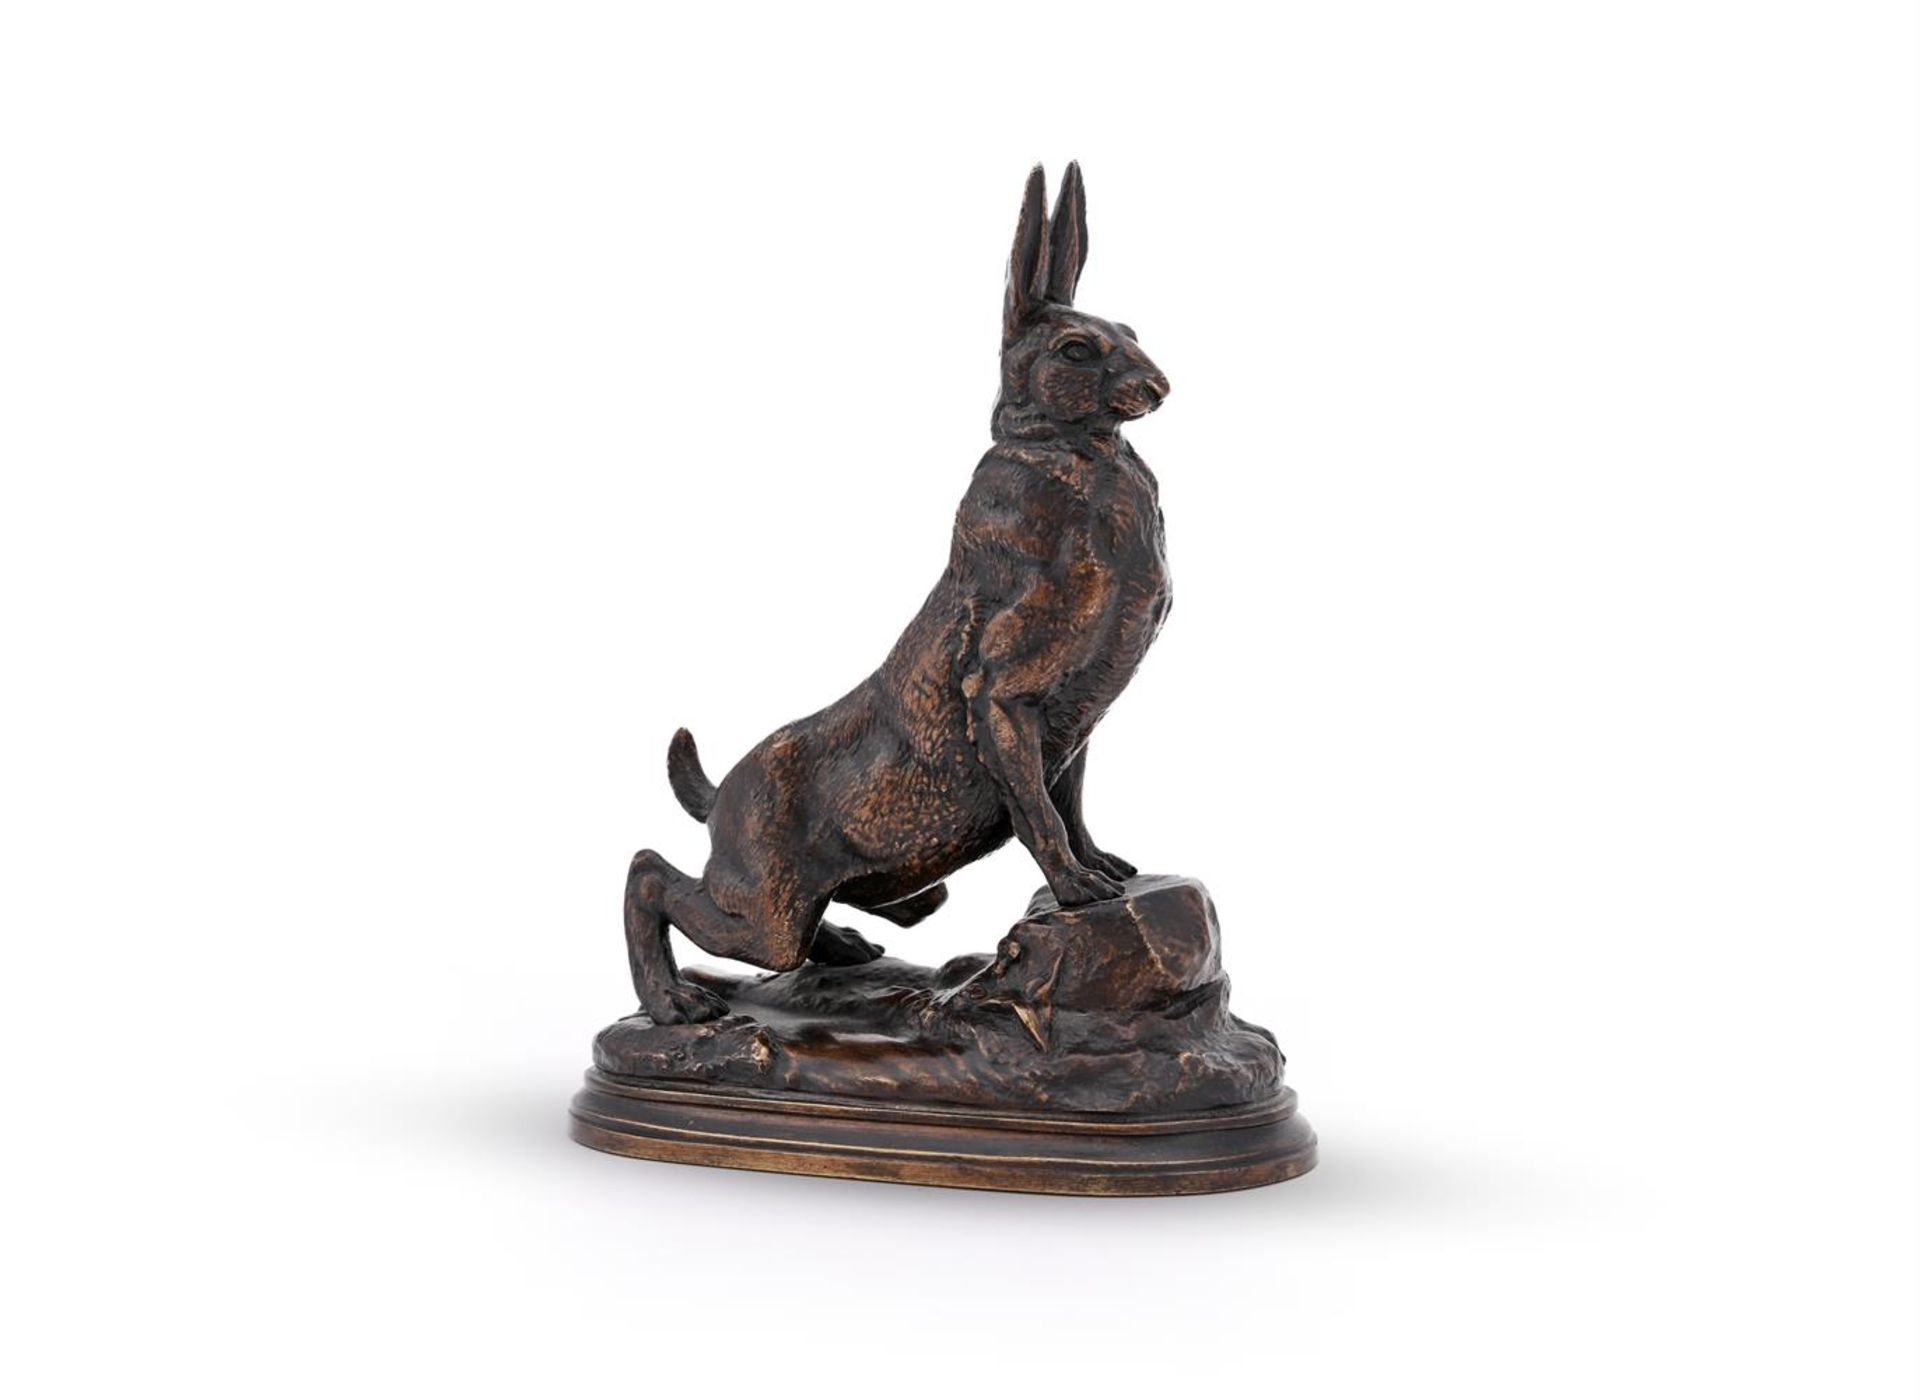 JULES MOIGNIEZ (FRENCH, 1835-1894), A BRONZE MODEL OF AN ALERT HARE